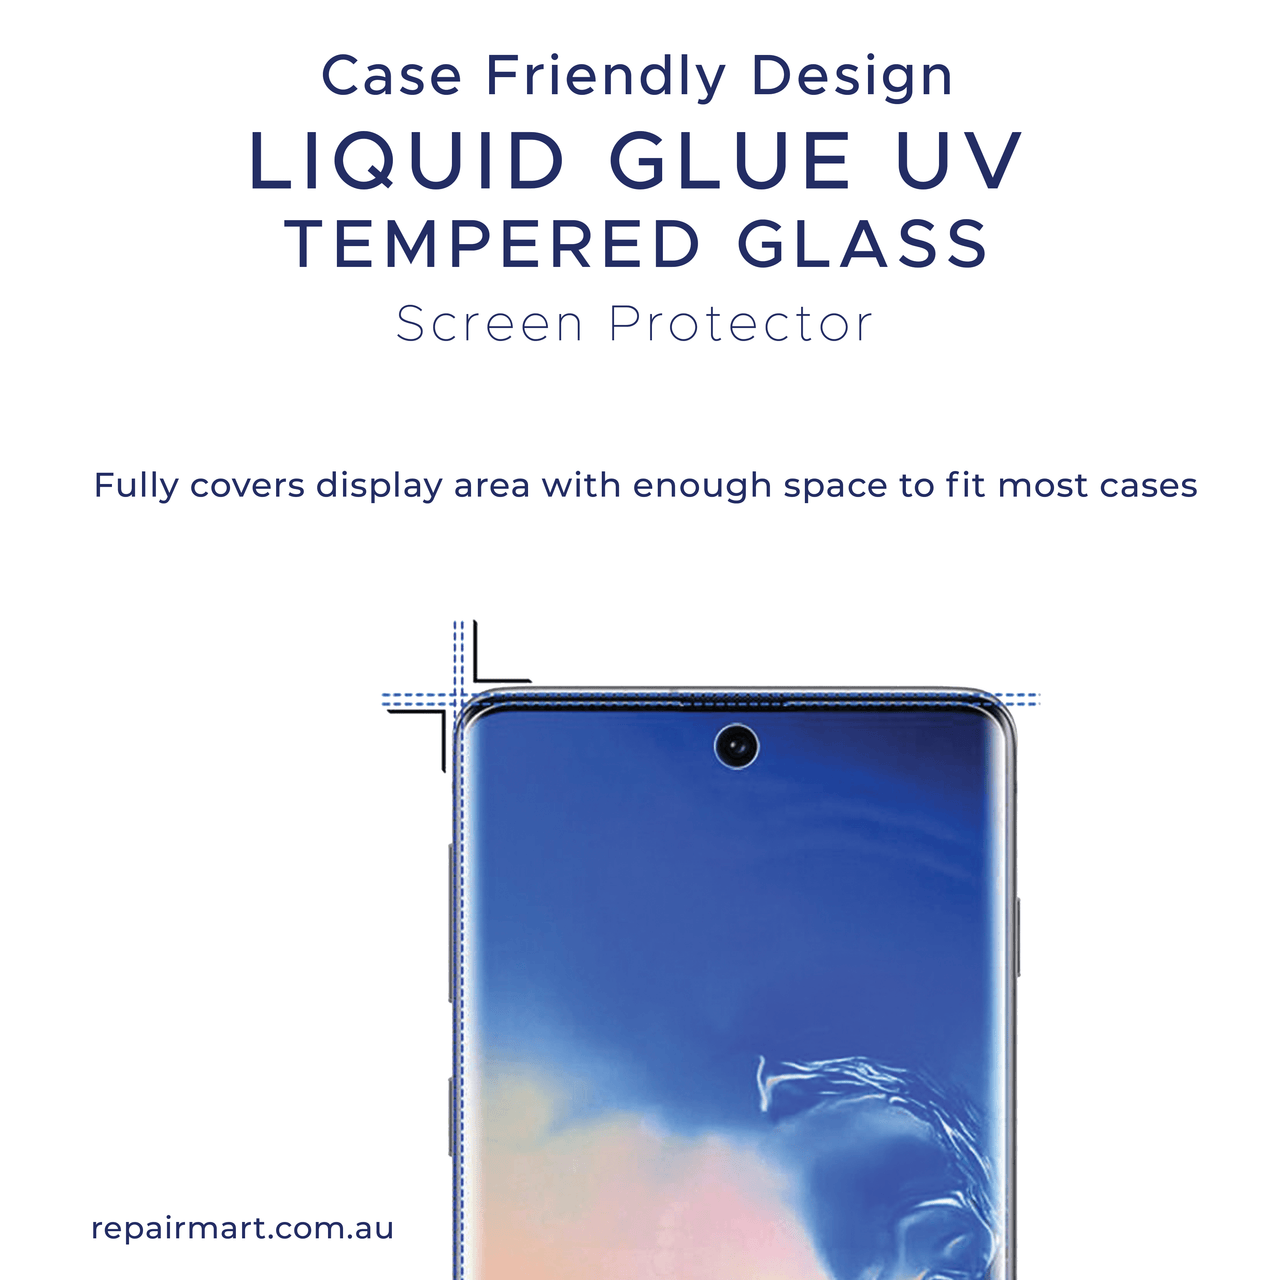 Advanced UV Liquid Glue 9H Tempered Glass Screen Protector for Huawei P50 - Ultimate Guard, Screen Armor, Bubble-Free Installation